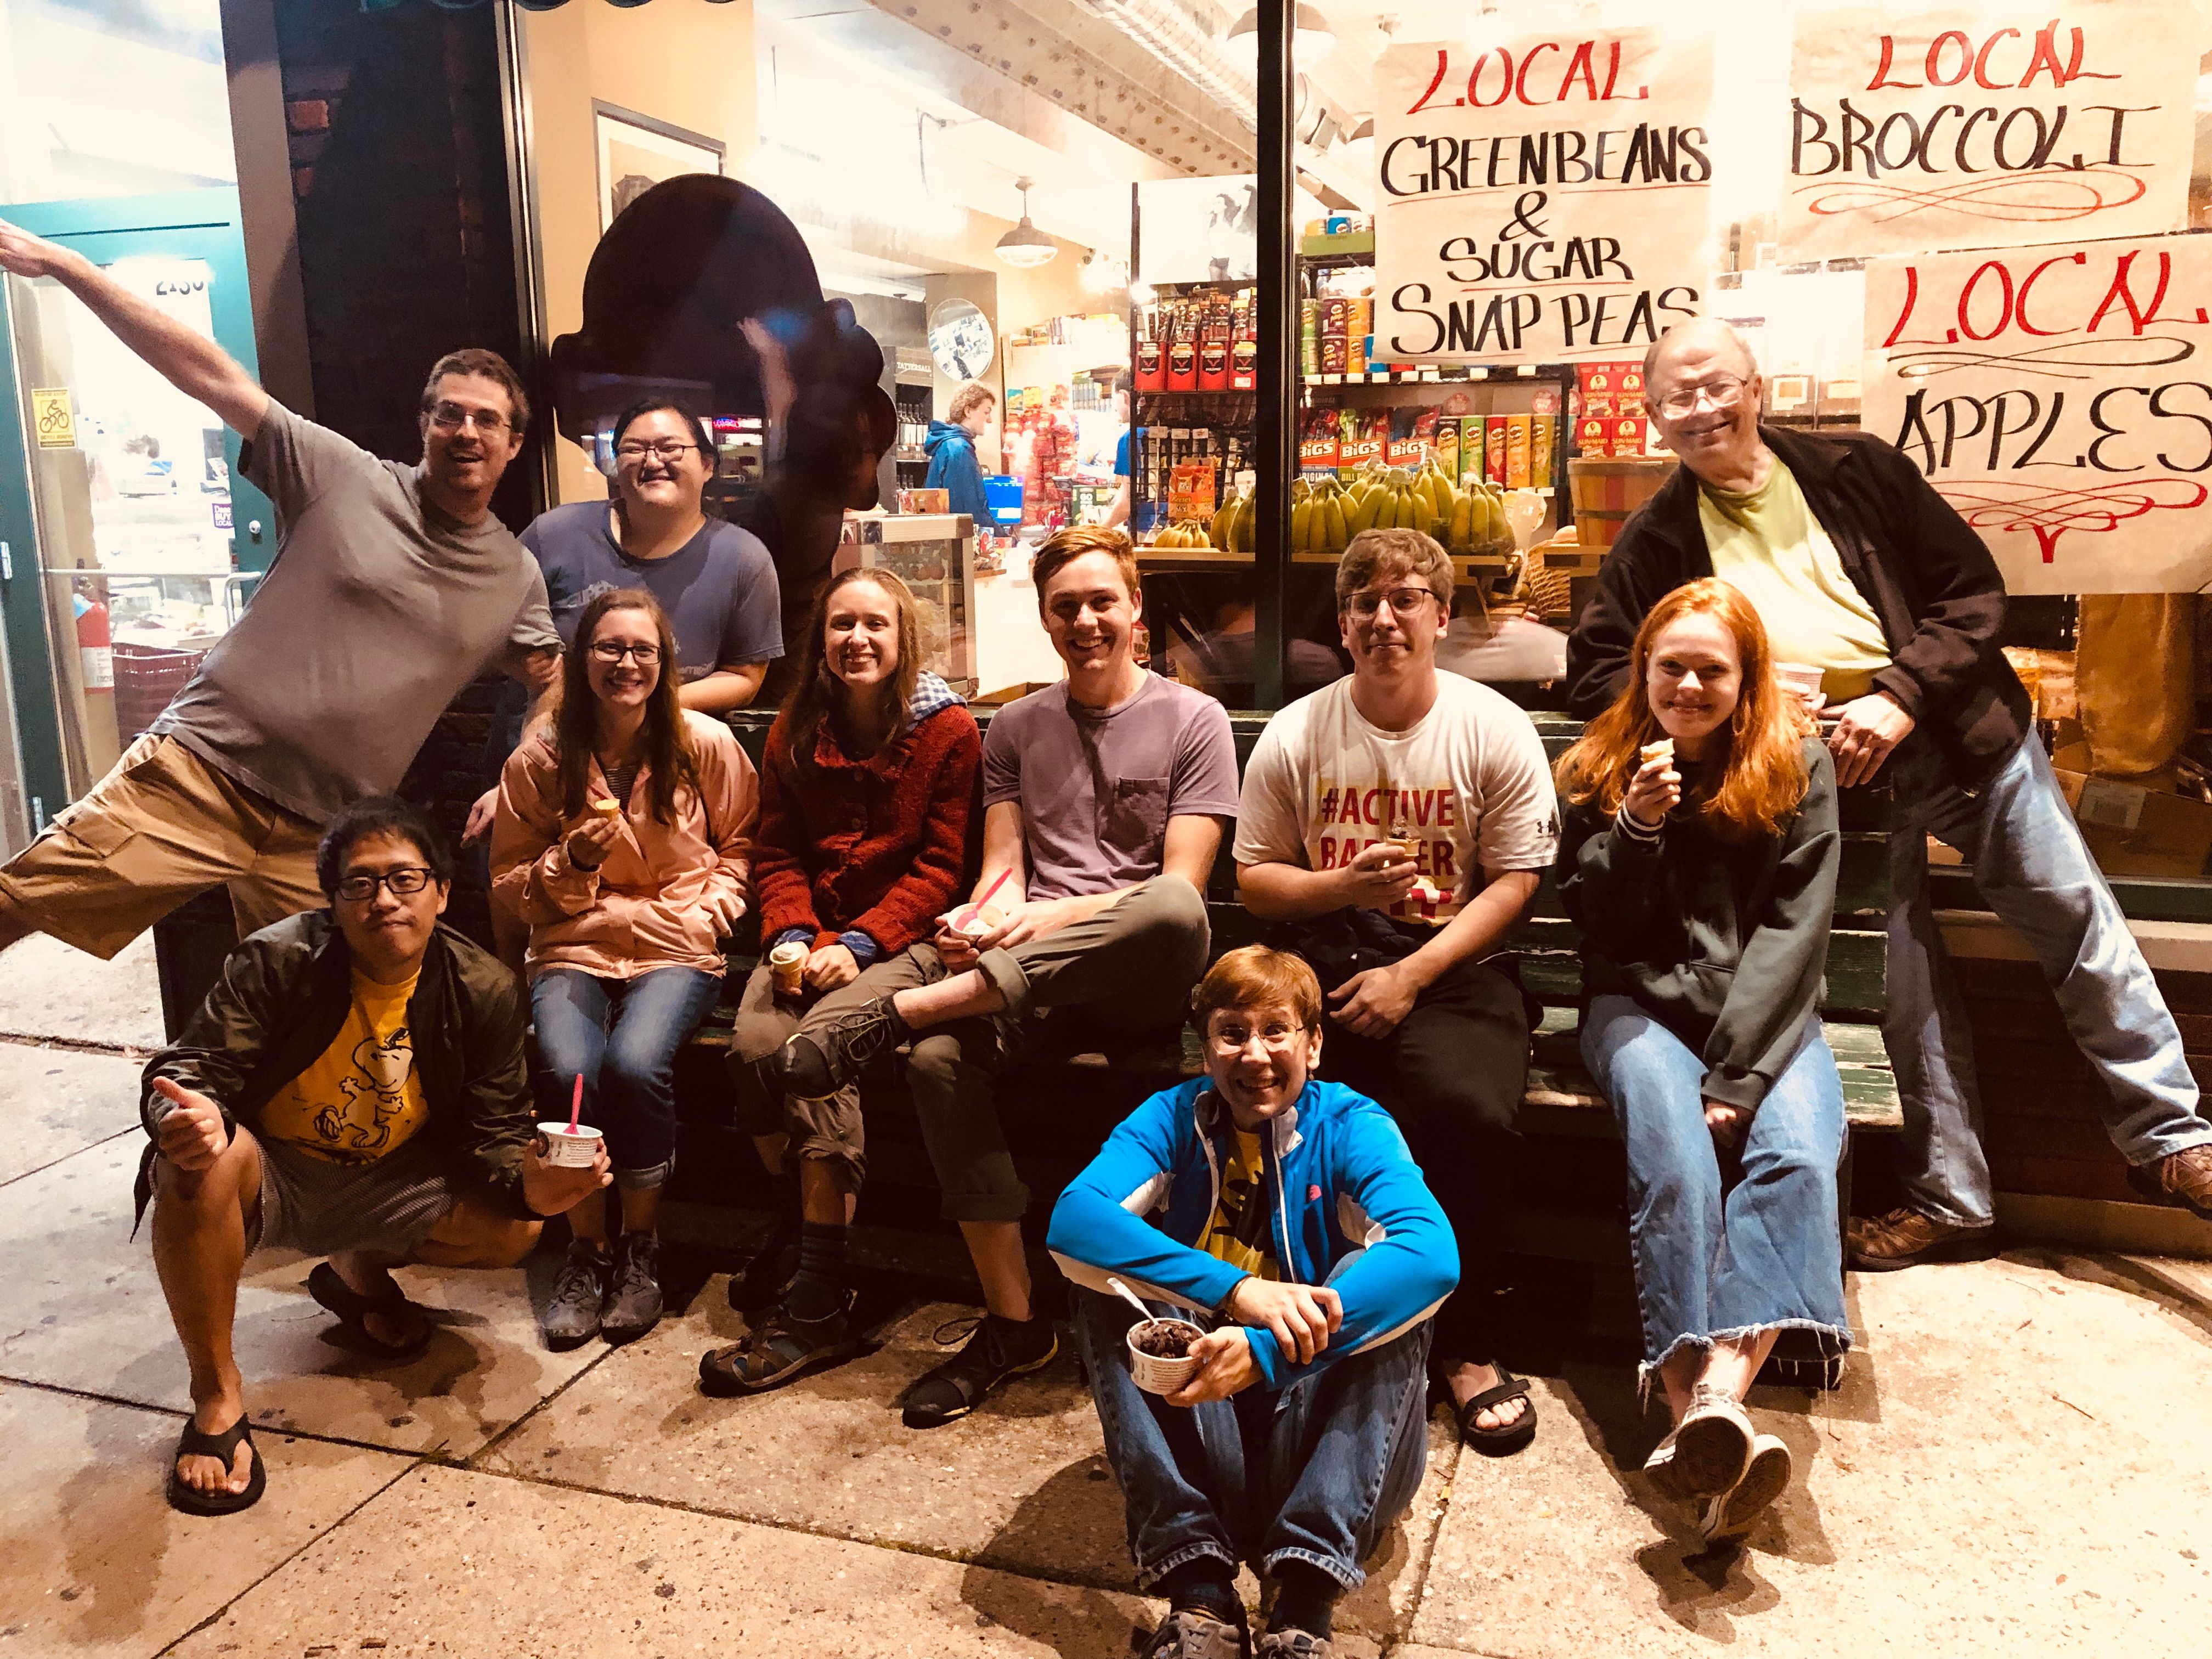 Summiteers buy ice cream at Regent Street Market after a house meeting. Group poses for a photo in front of the store. (Circa fall 2019)